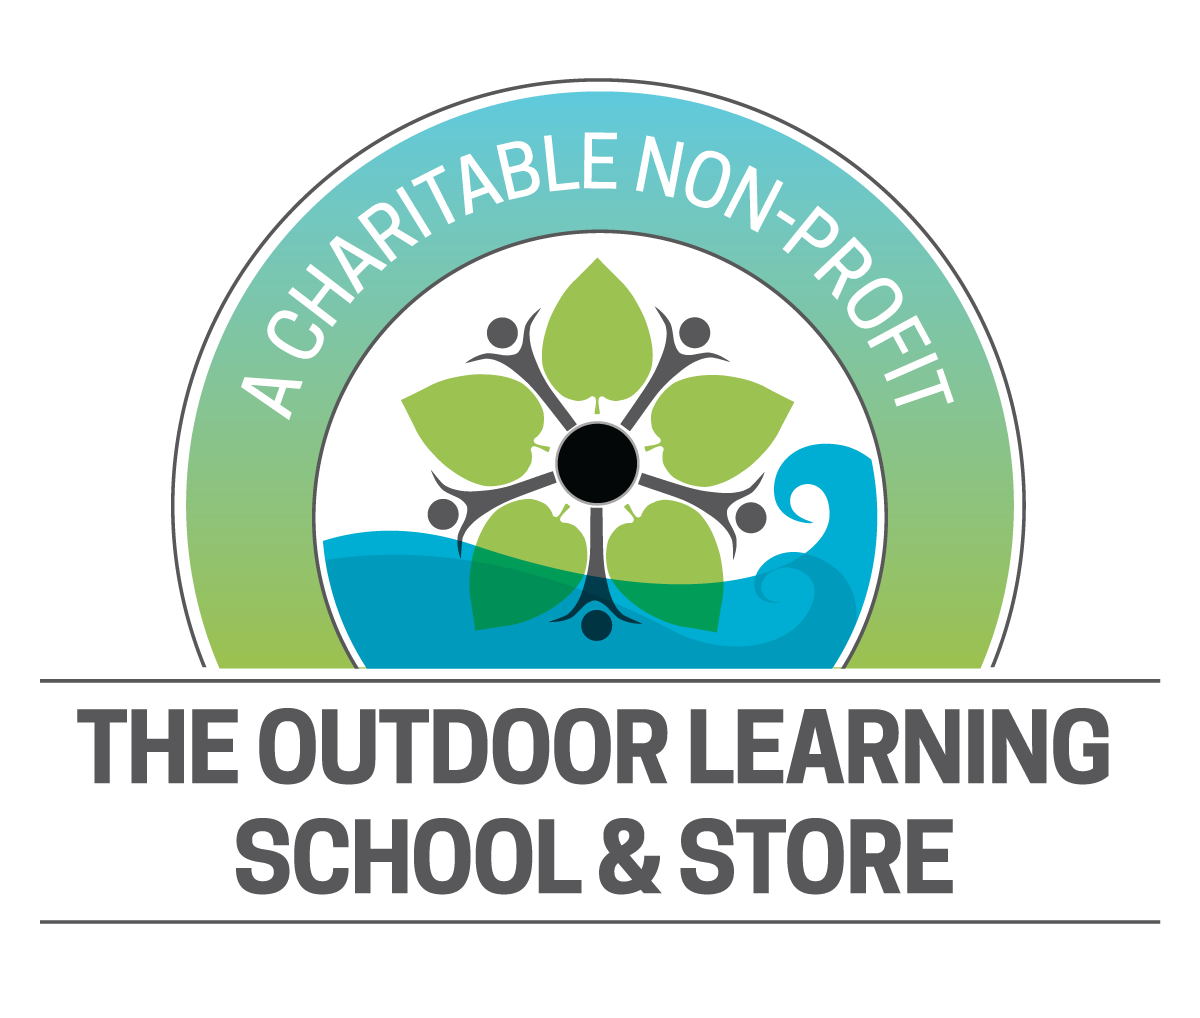 Outdoor Learning School & Store